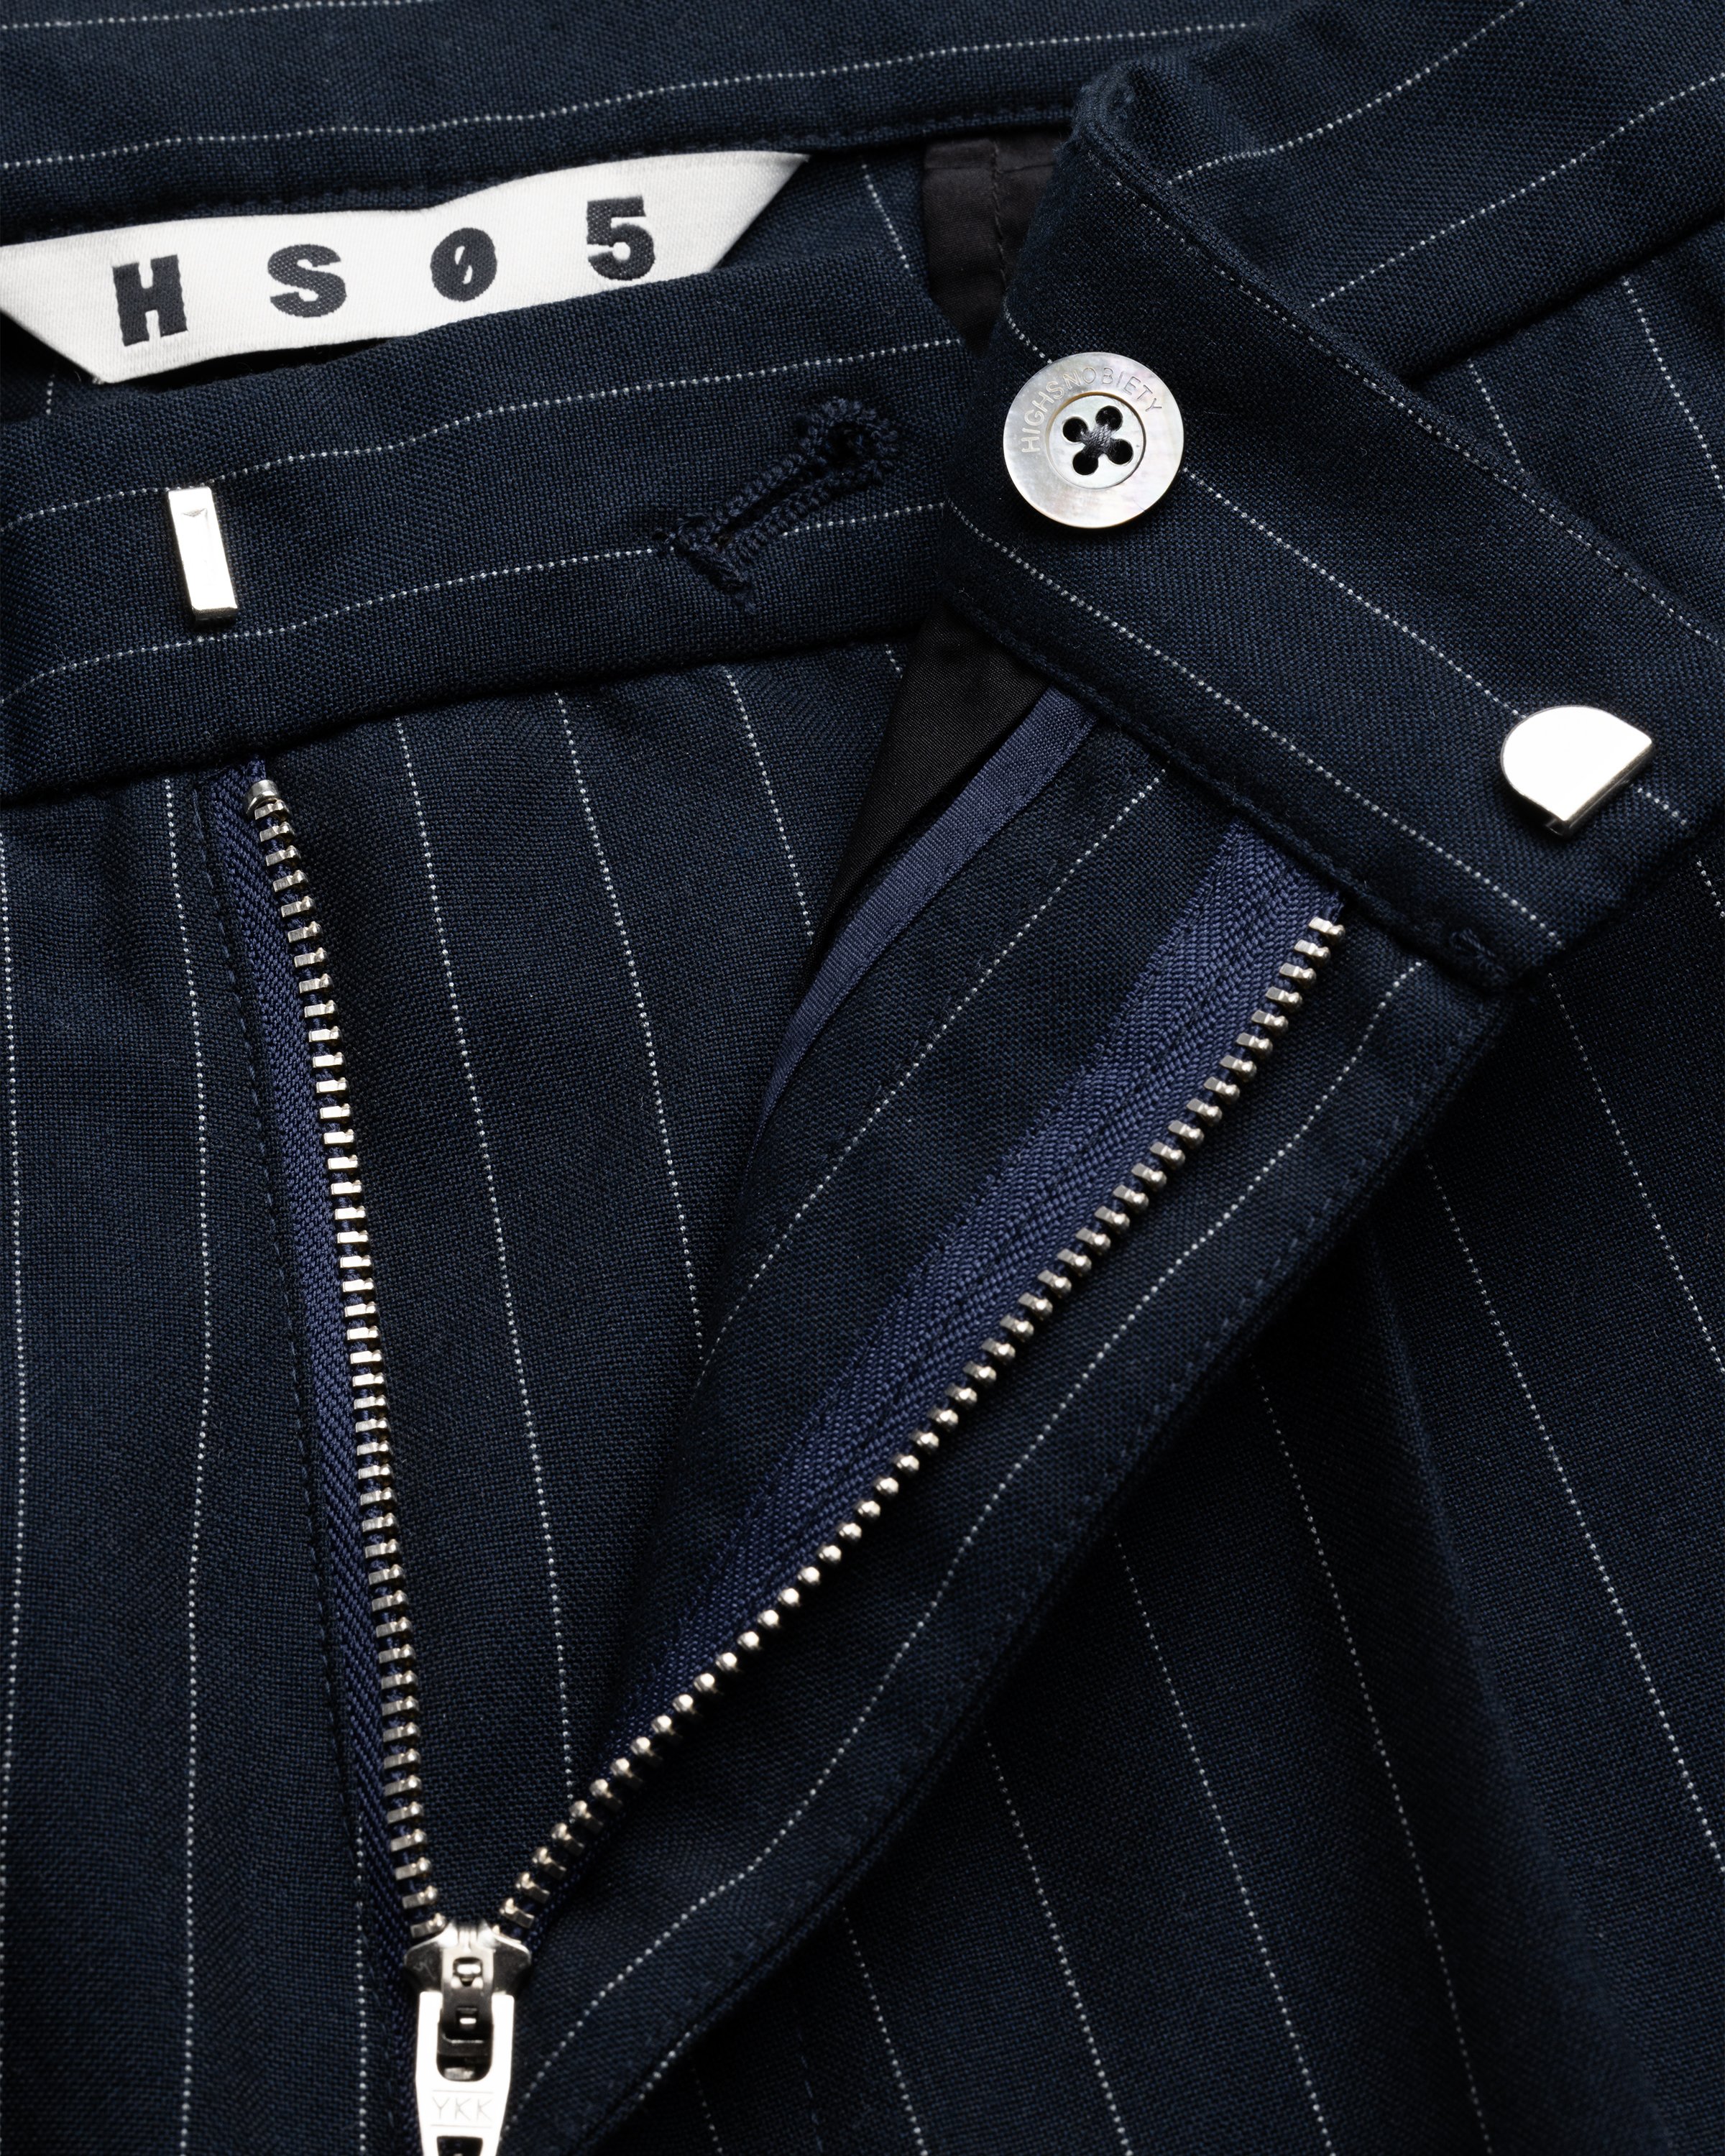 Highsnobiety HS05 - Tropical Suiting Pants Navy Striped - Clothing - Navy Striped - Image 6